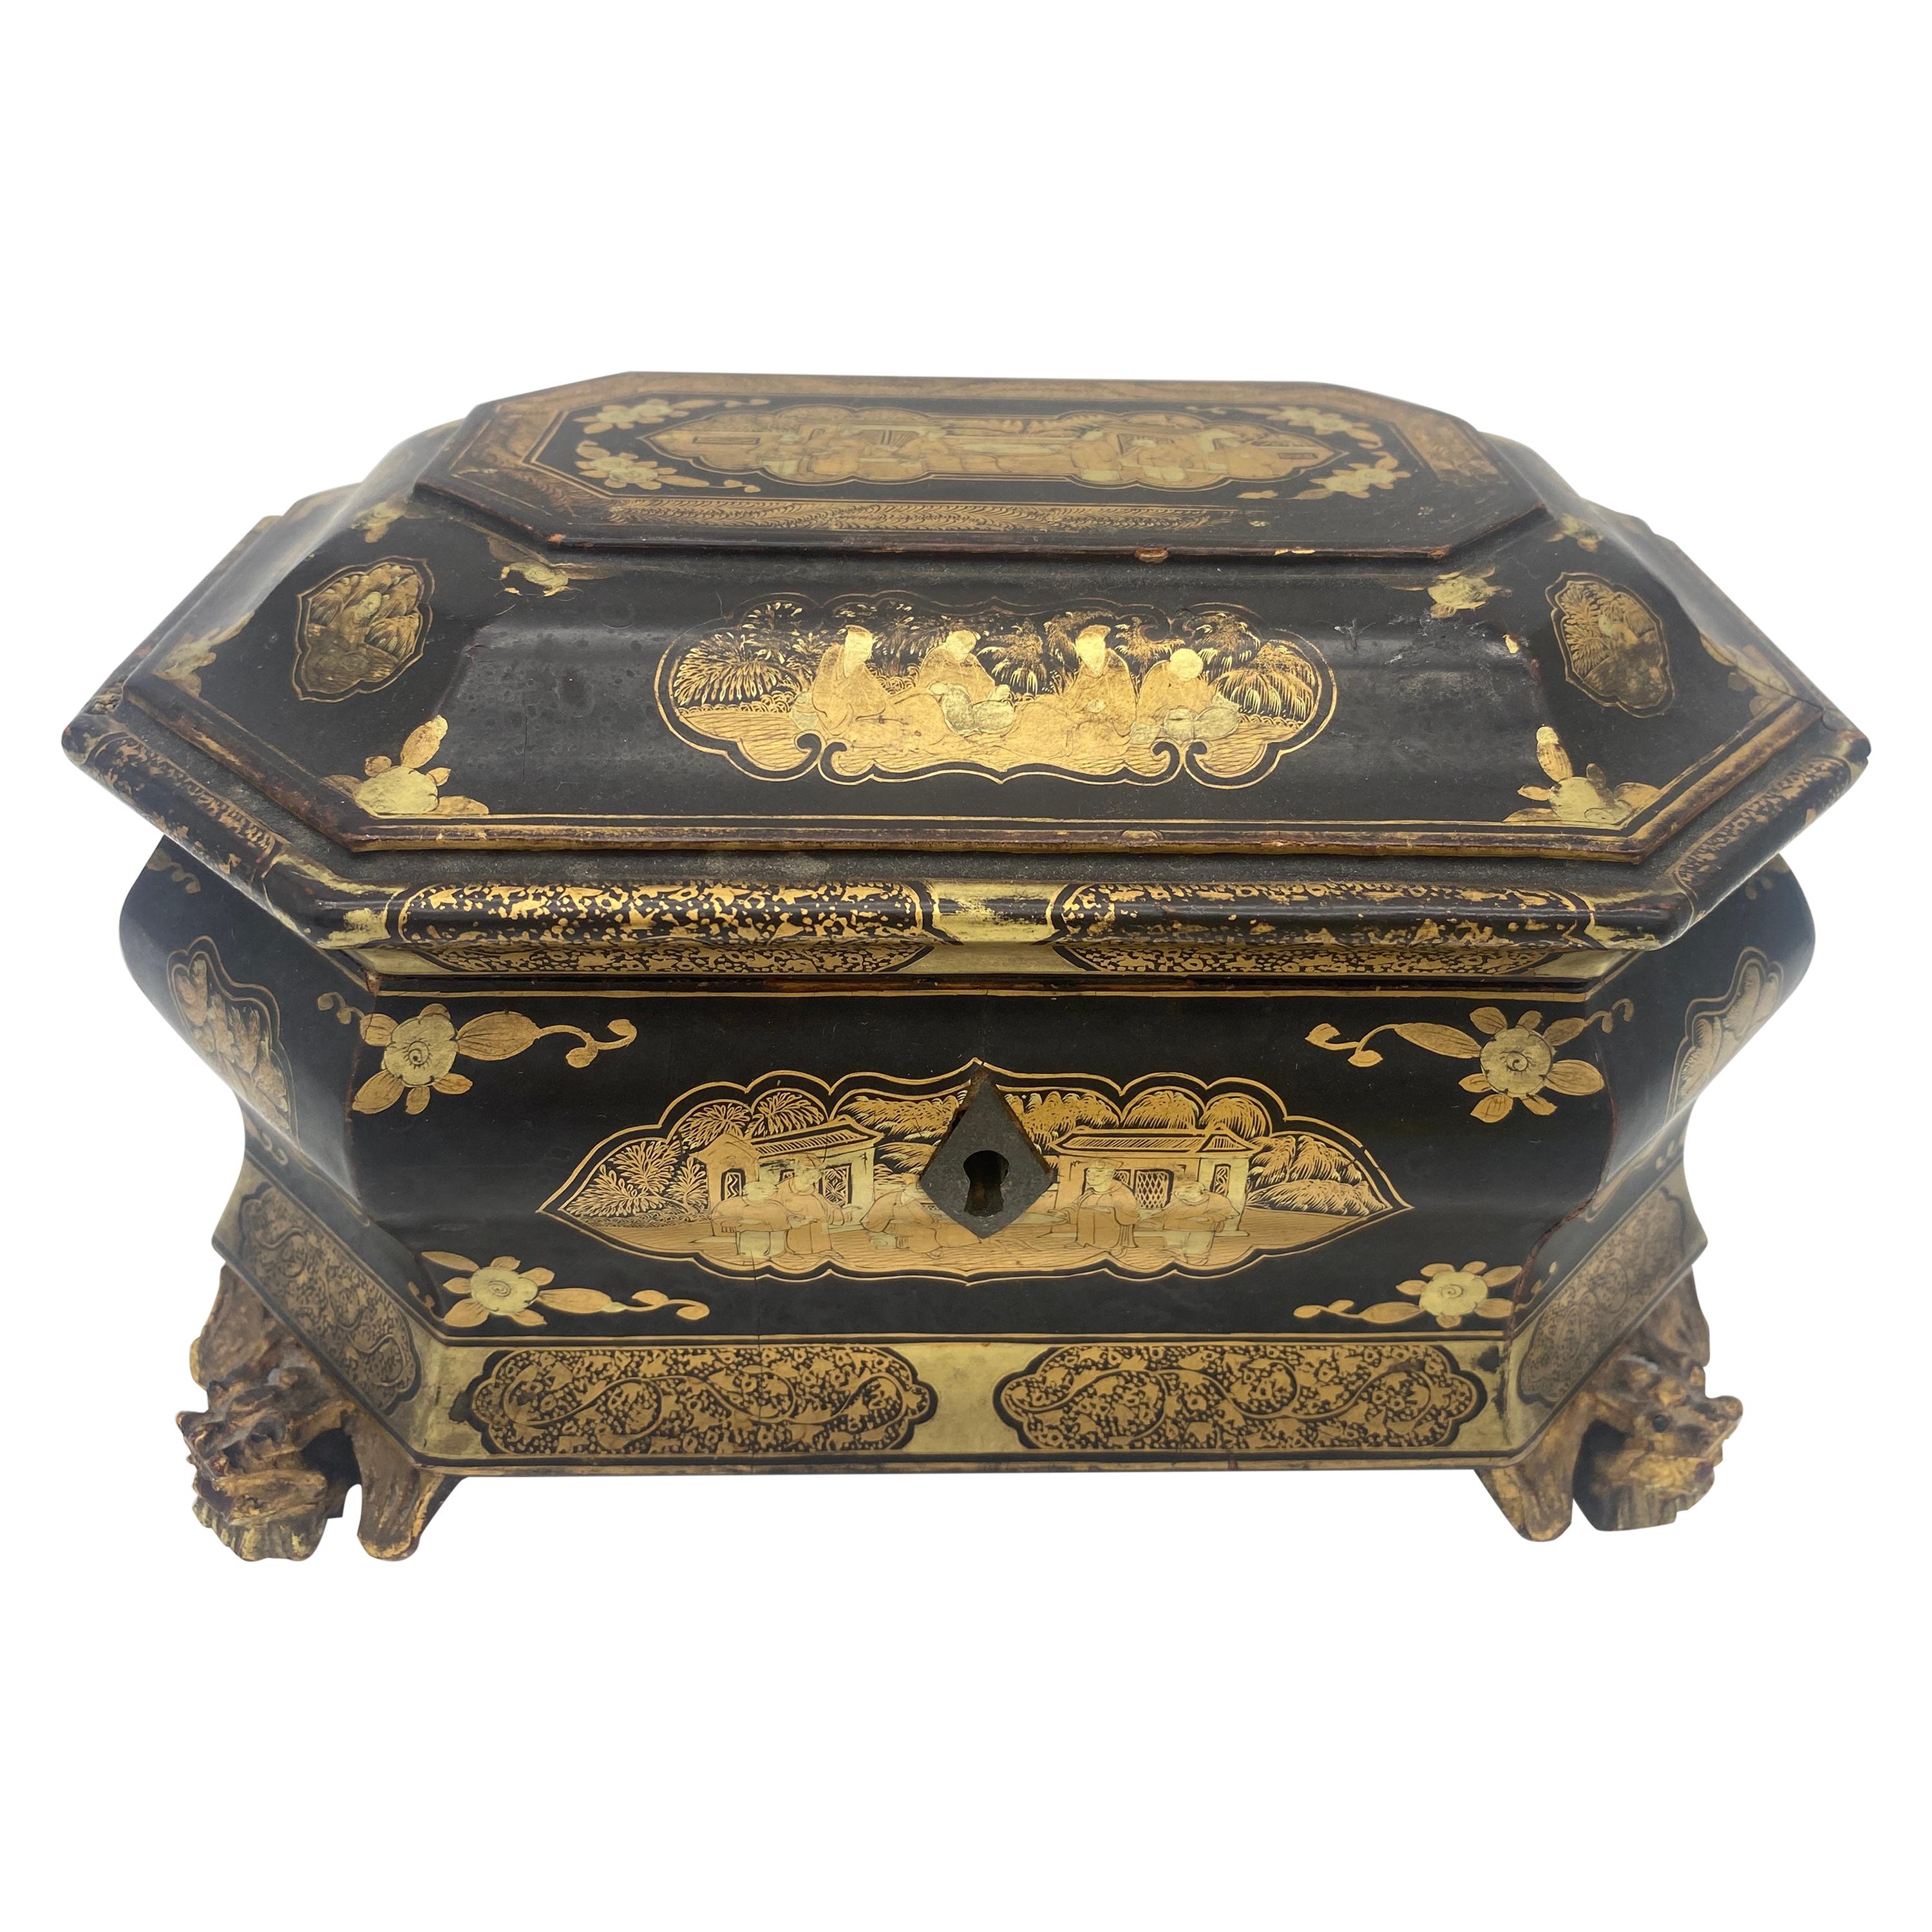 19th Century Antique Gilt Lacquer Chinese Tea Caddy